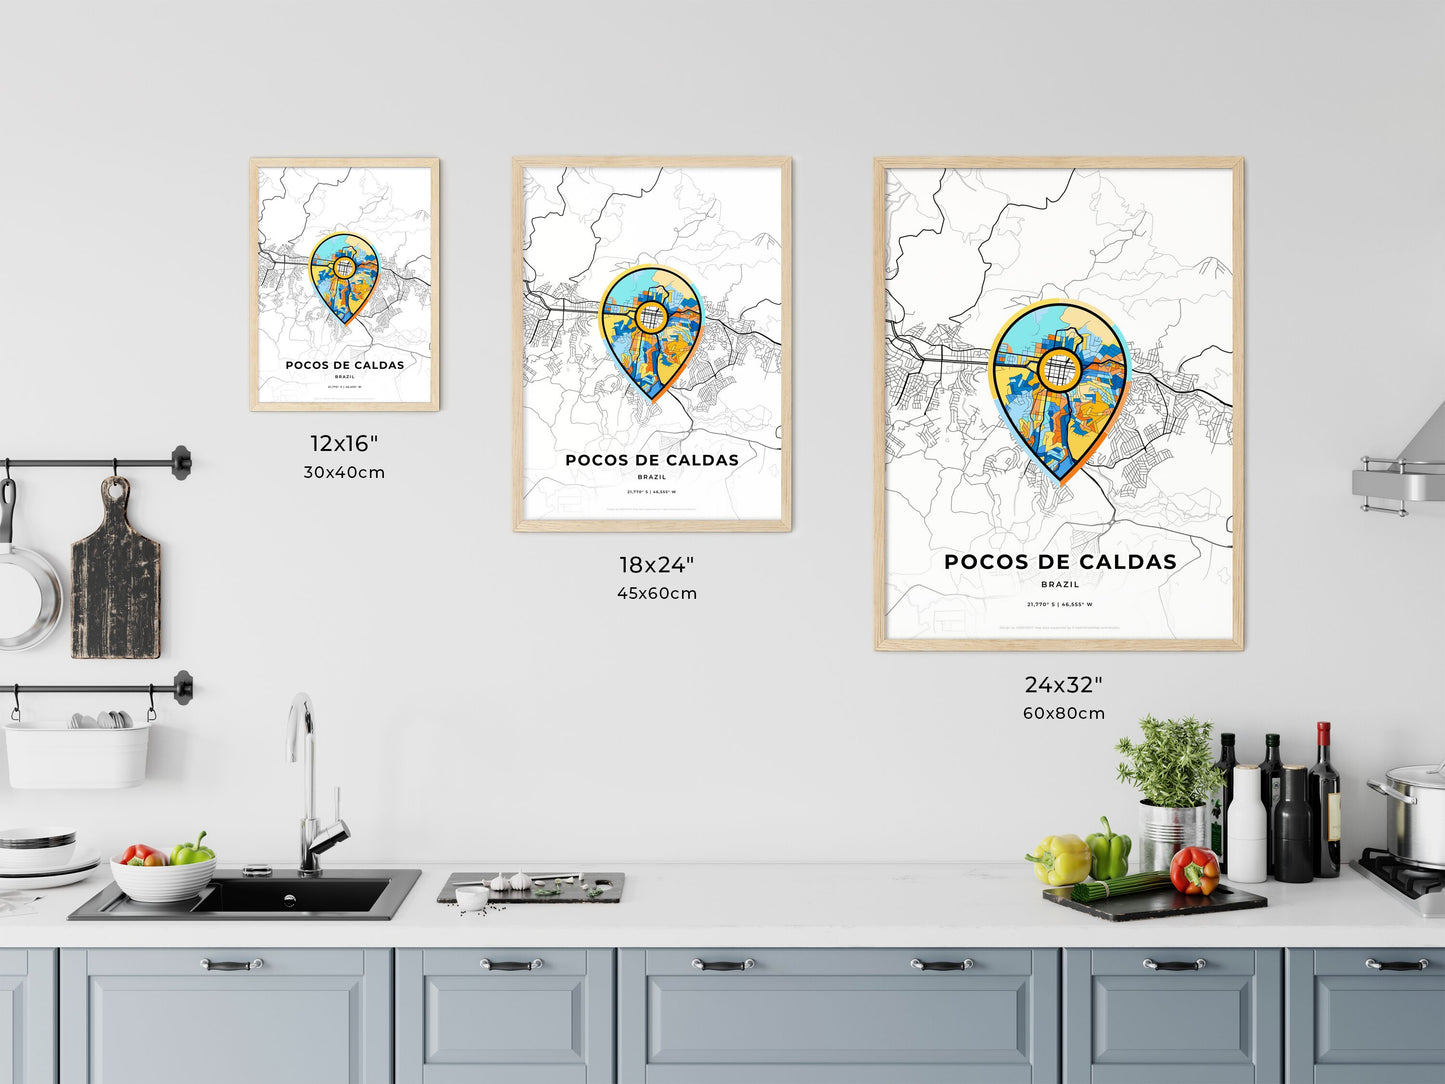 POCOS DE CALDAS BRAZIL minimal art map with a colorful icon. Where it all began, Couple map gift.